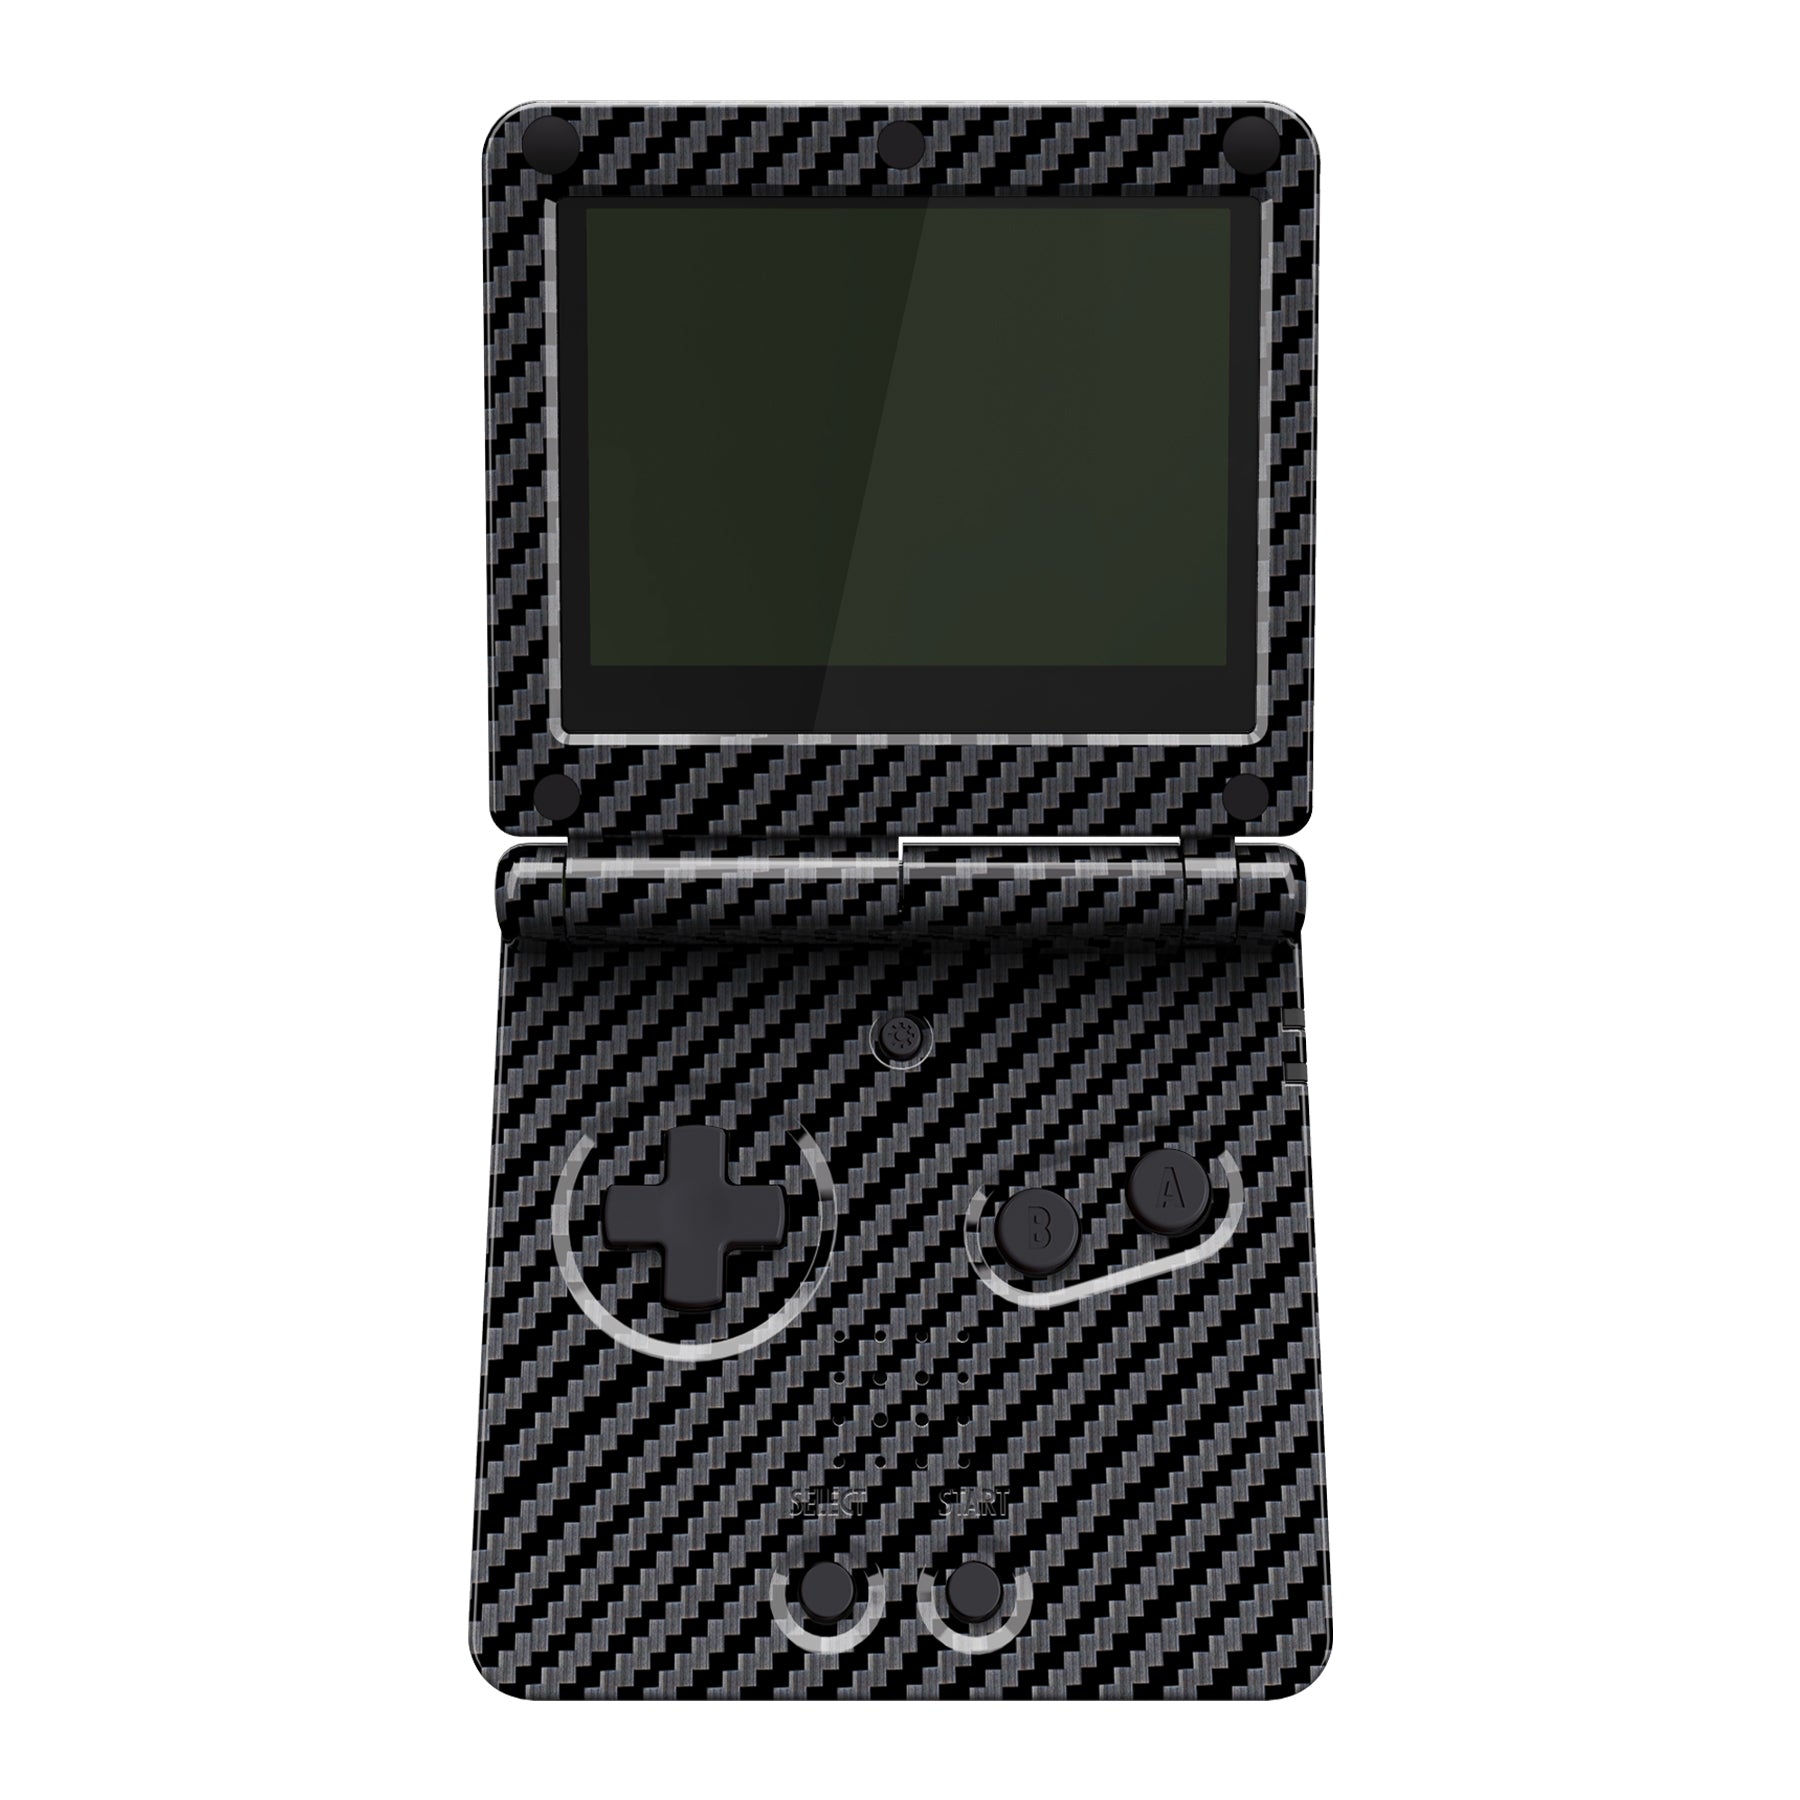 eXtremeRate IPS Ready Upgraded Replacement Full Set Shells with Buttons for Gameboy Advance SP GBA SP, Compatible with Both IPS & Standard LCD - Graphite Carbon Fiber eXtremeRate